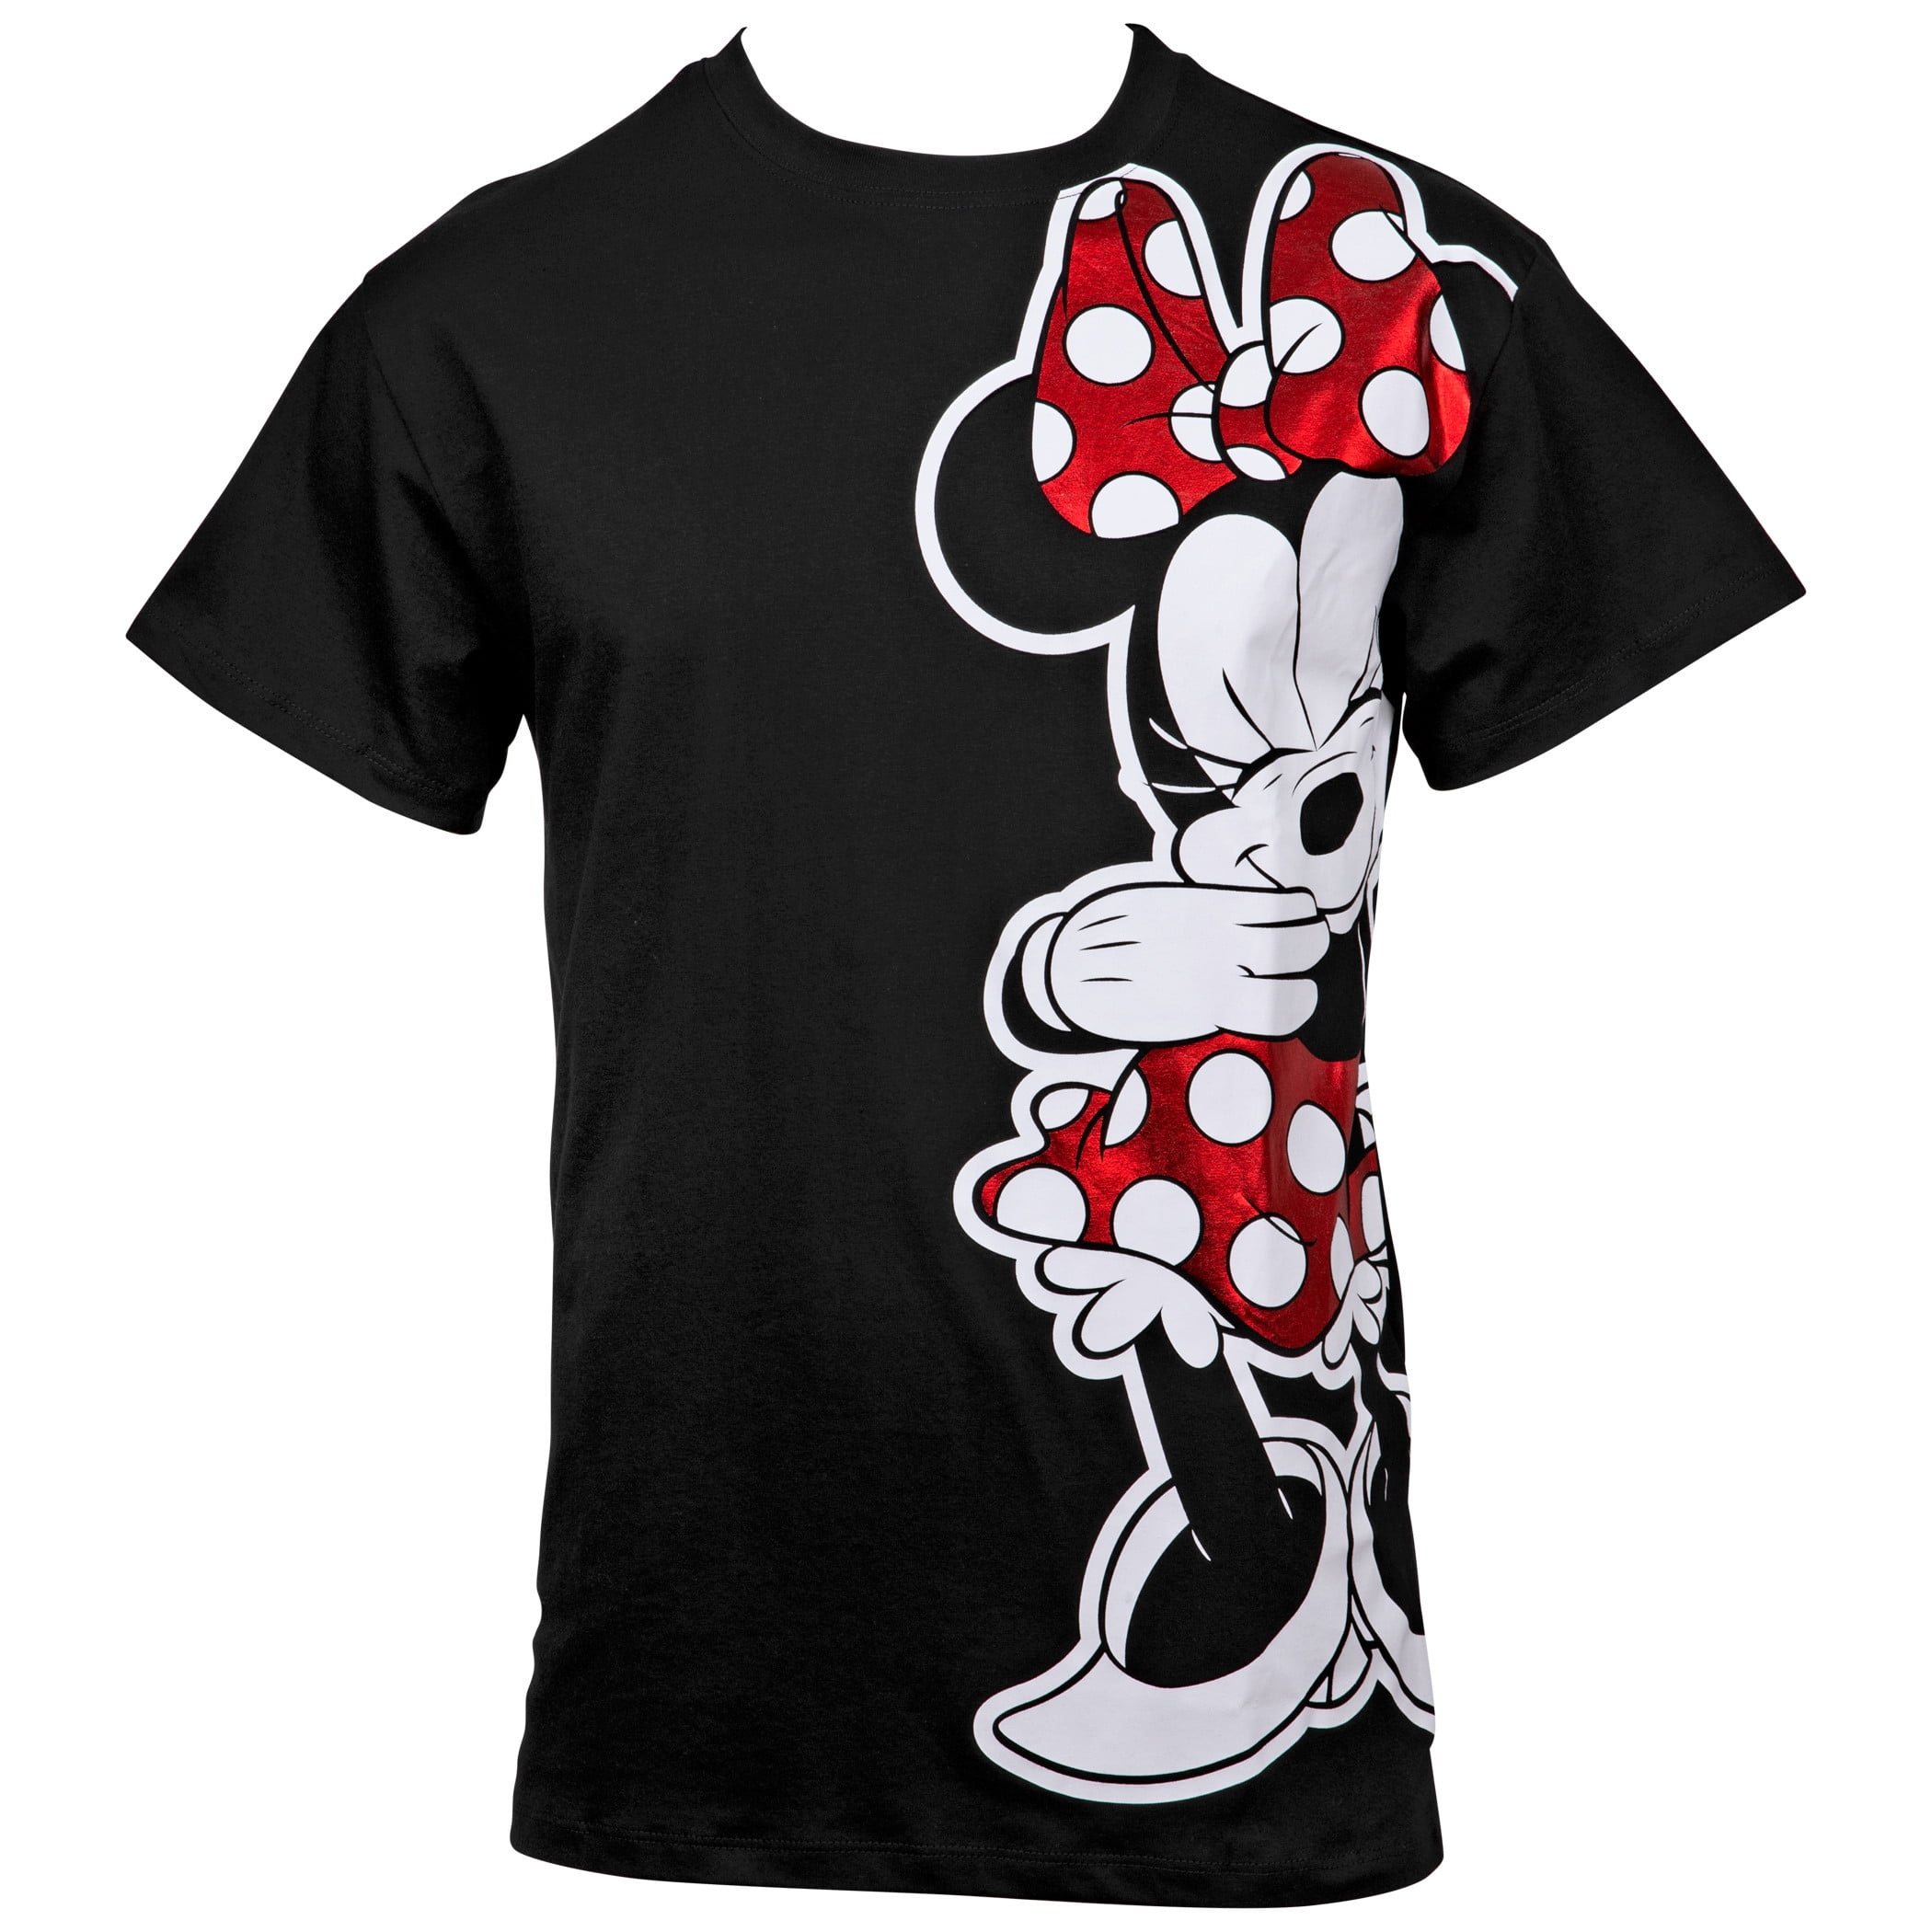 T-Shirt-Small Disney Pose Shy Minnie Mouse Expression